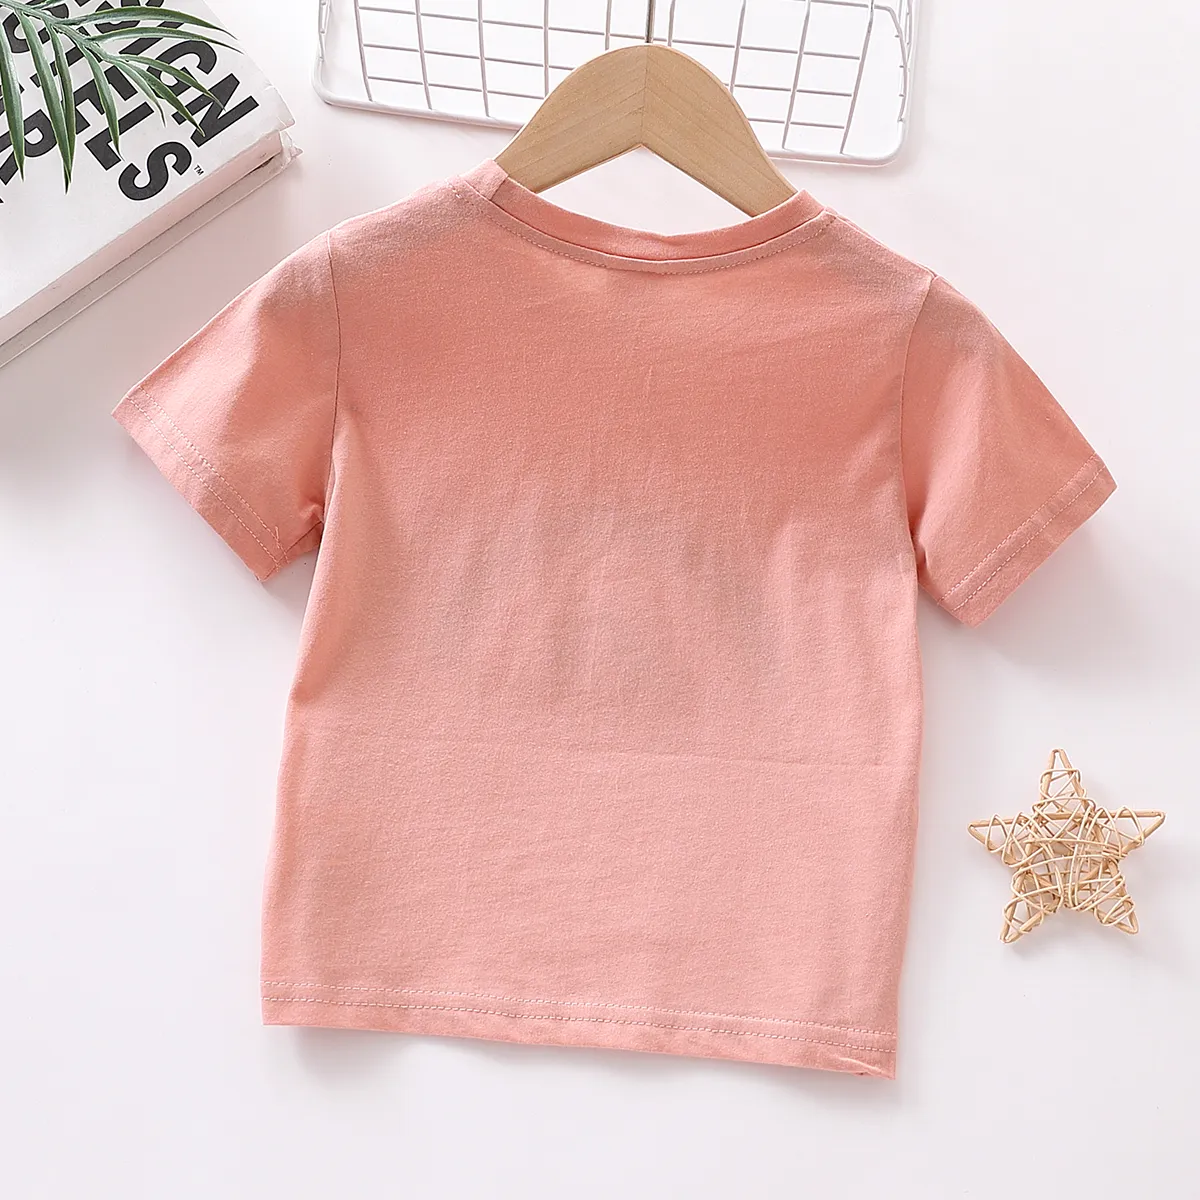 Toddler Girl 100% Cotton Rainbow Embroidered Short-sleeve Tee Pink big image 1